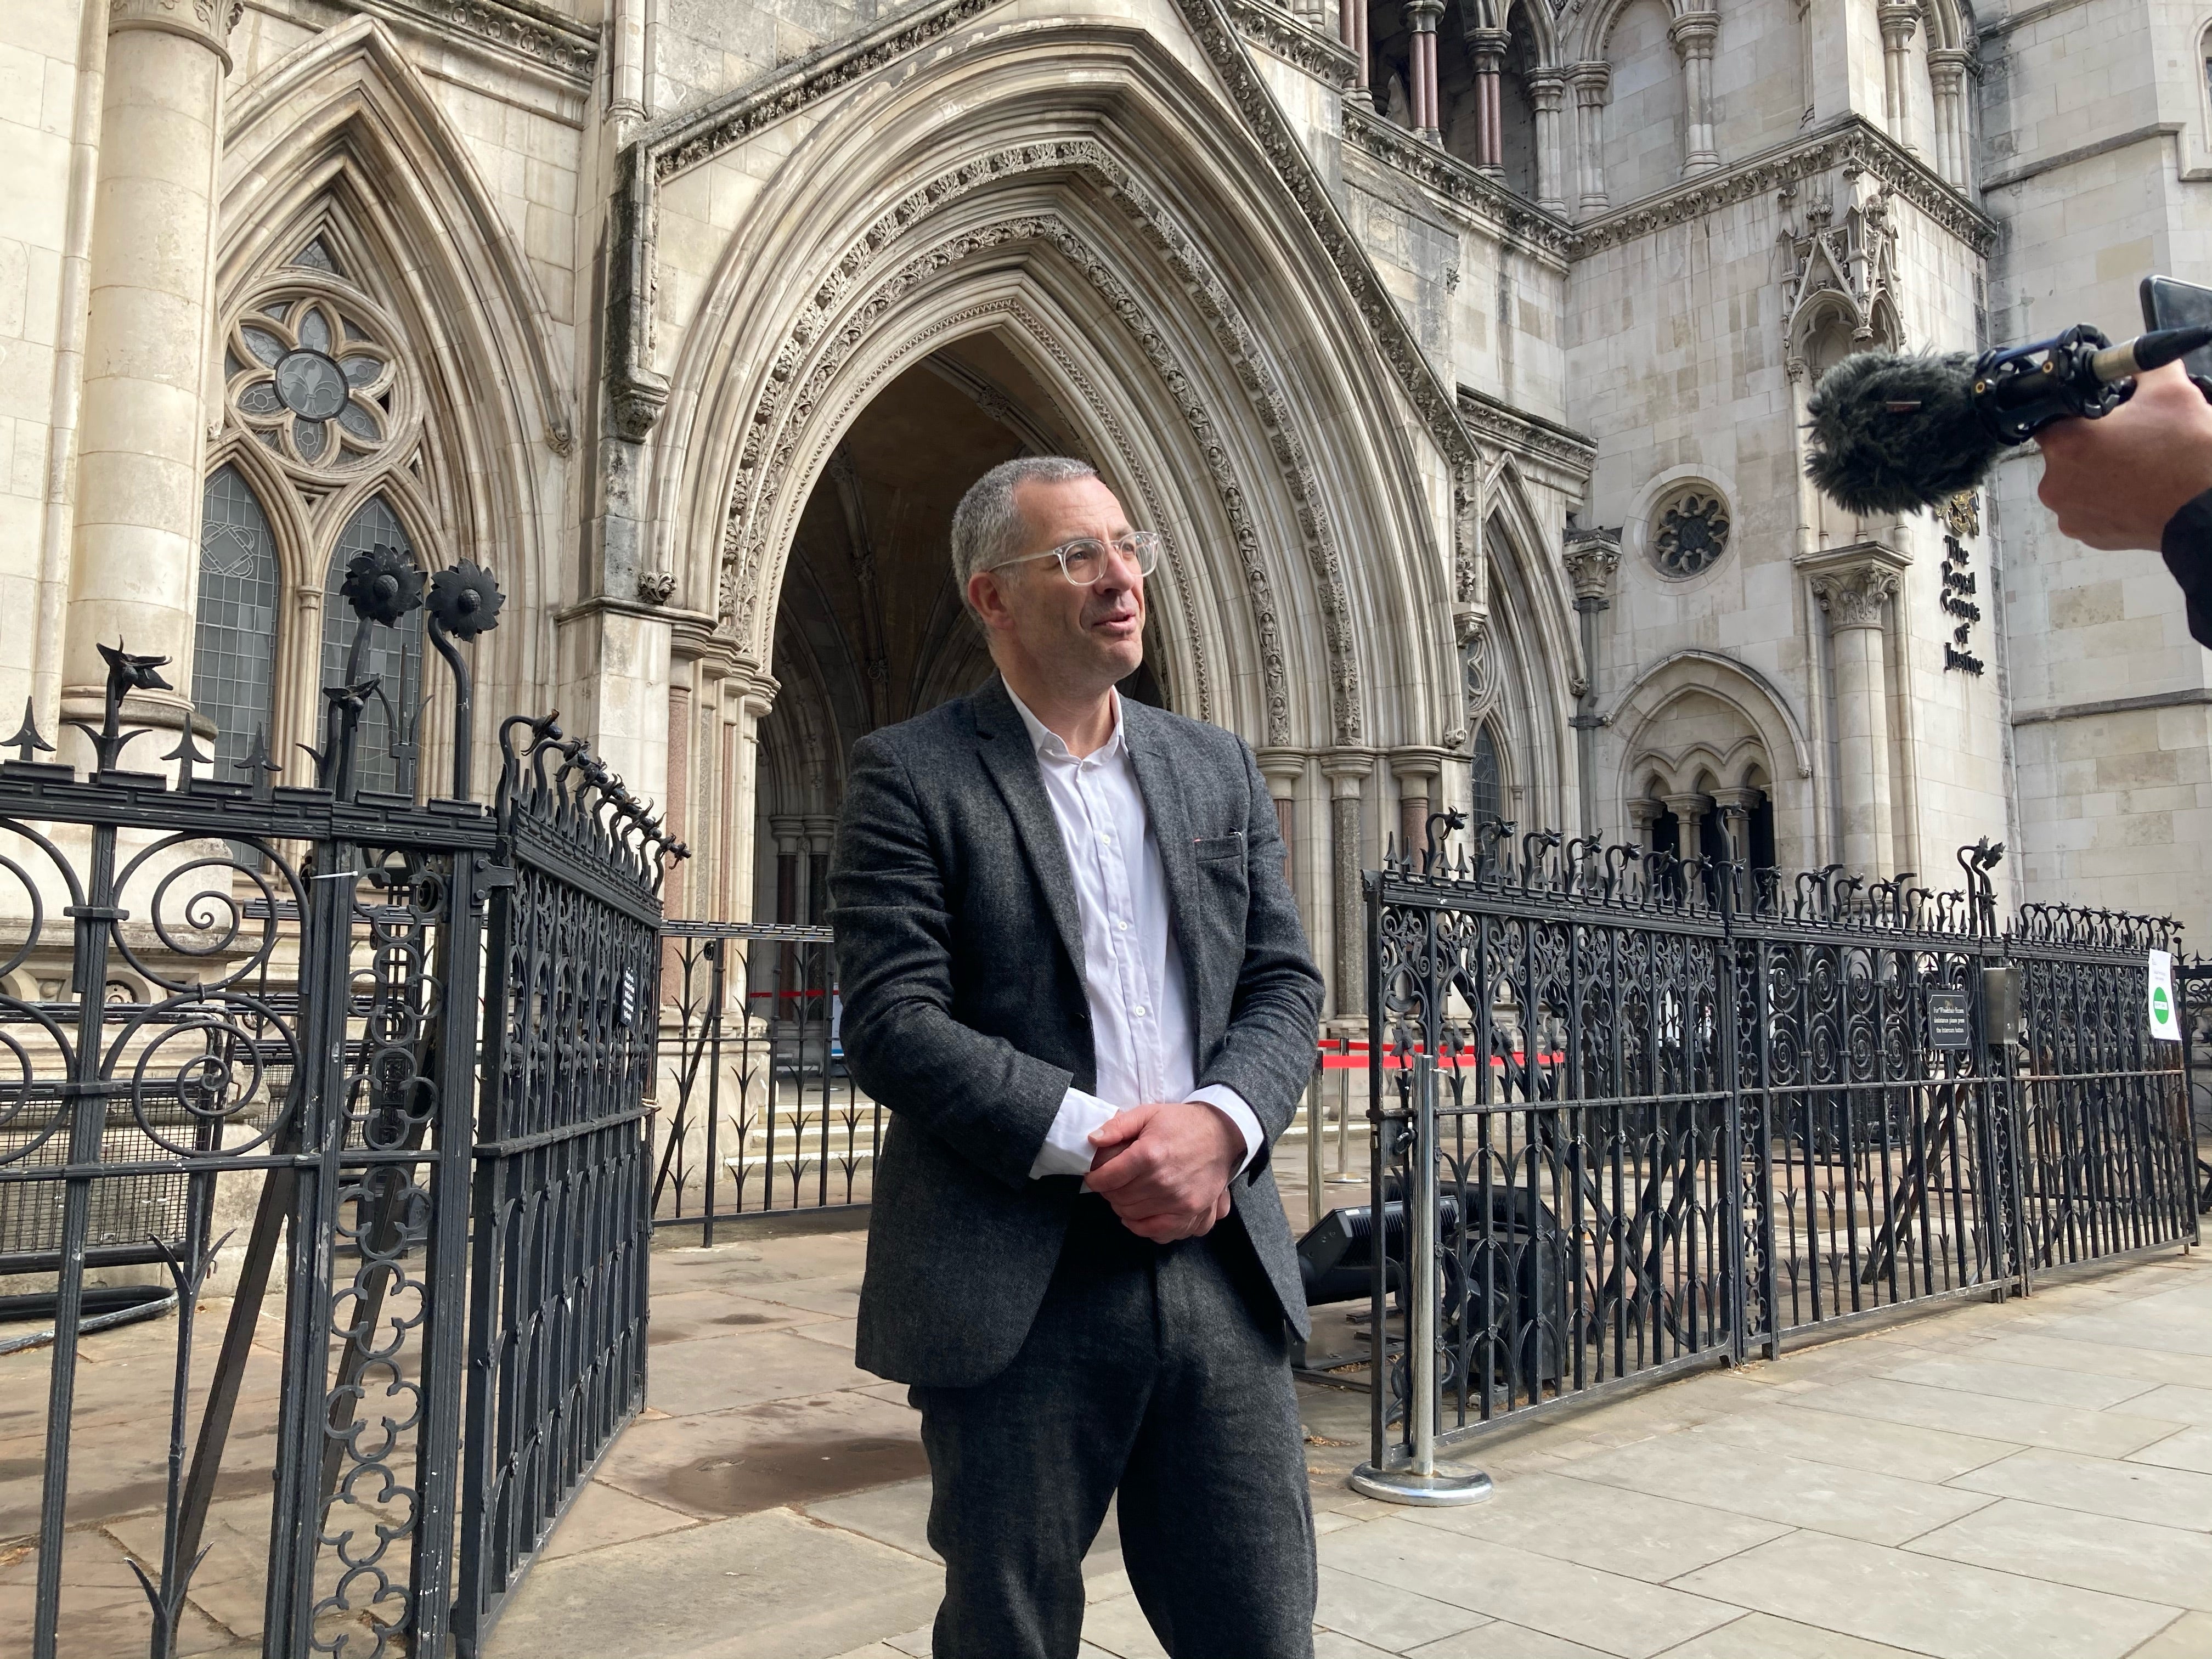 Tim Crosland speaks to media outside the Royal Courts of Justice, ahead of his hearing for contempt of court